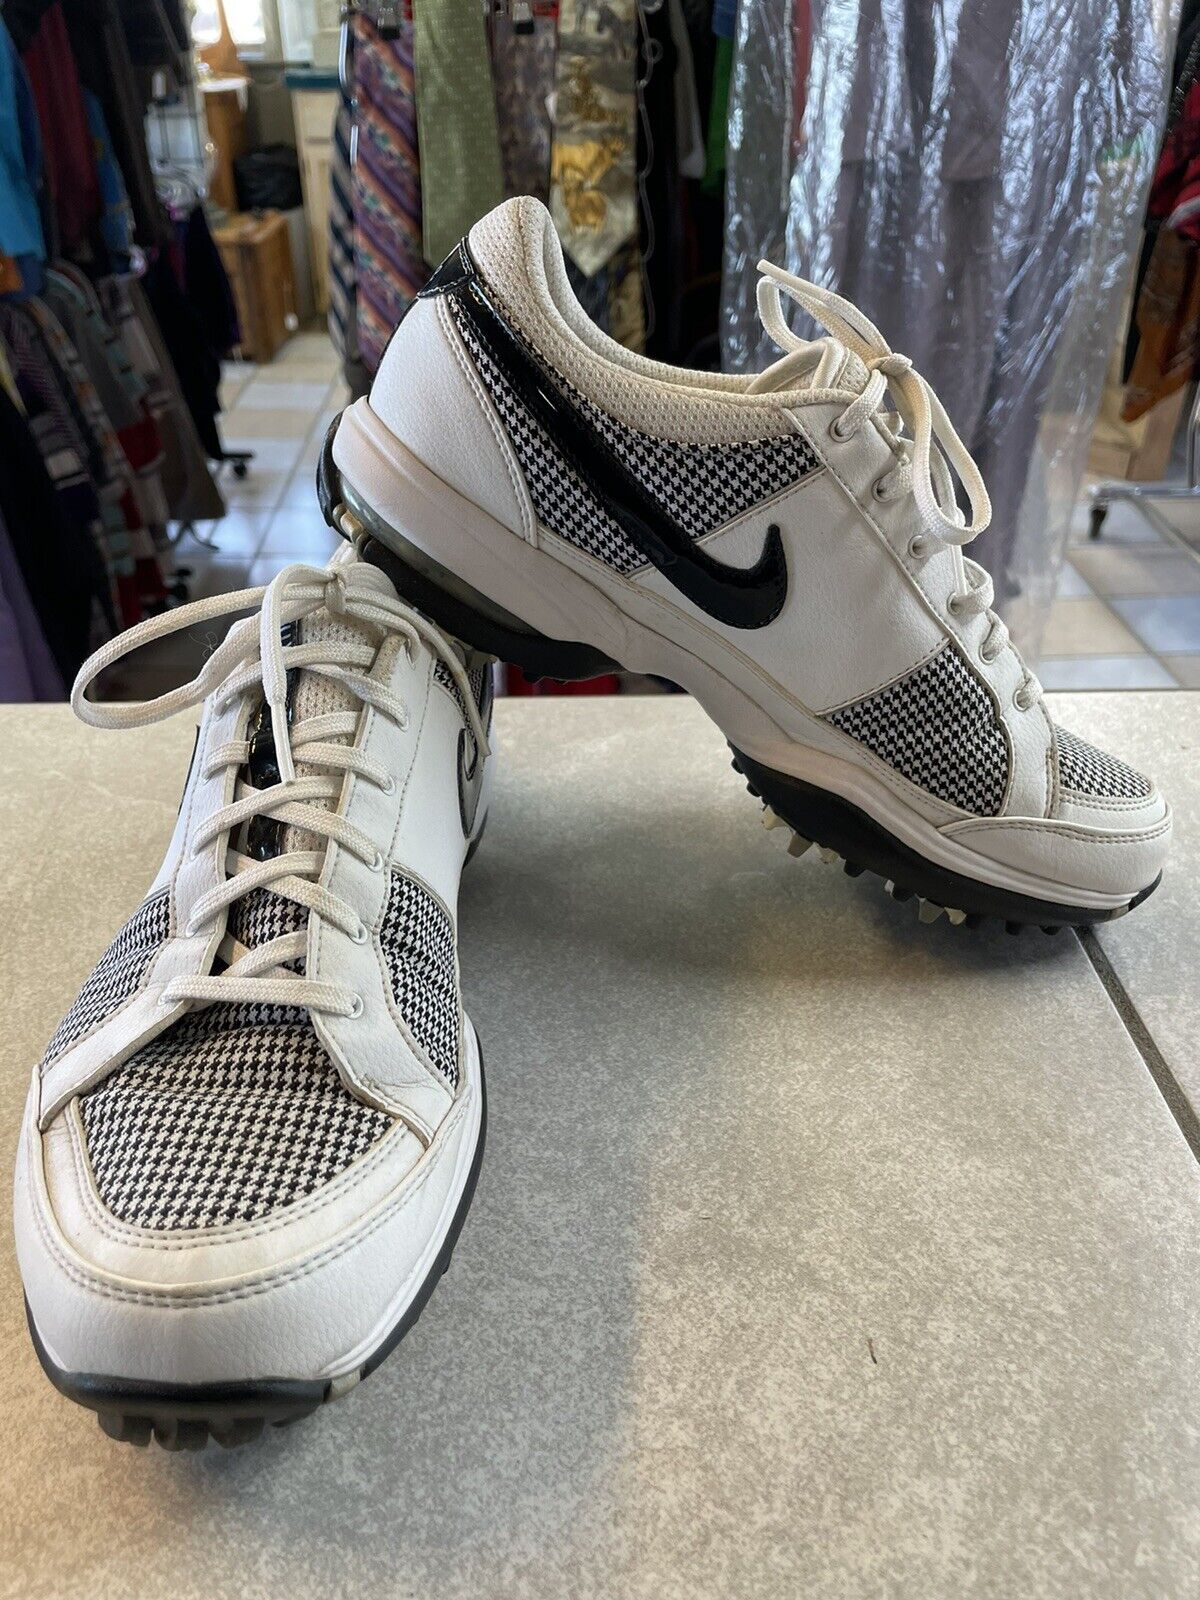 Nike Air Women's Golf Shoes US Checkered Fees free Sale item White 3176 9 Black Size